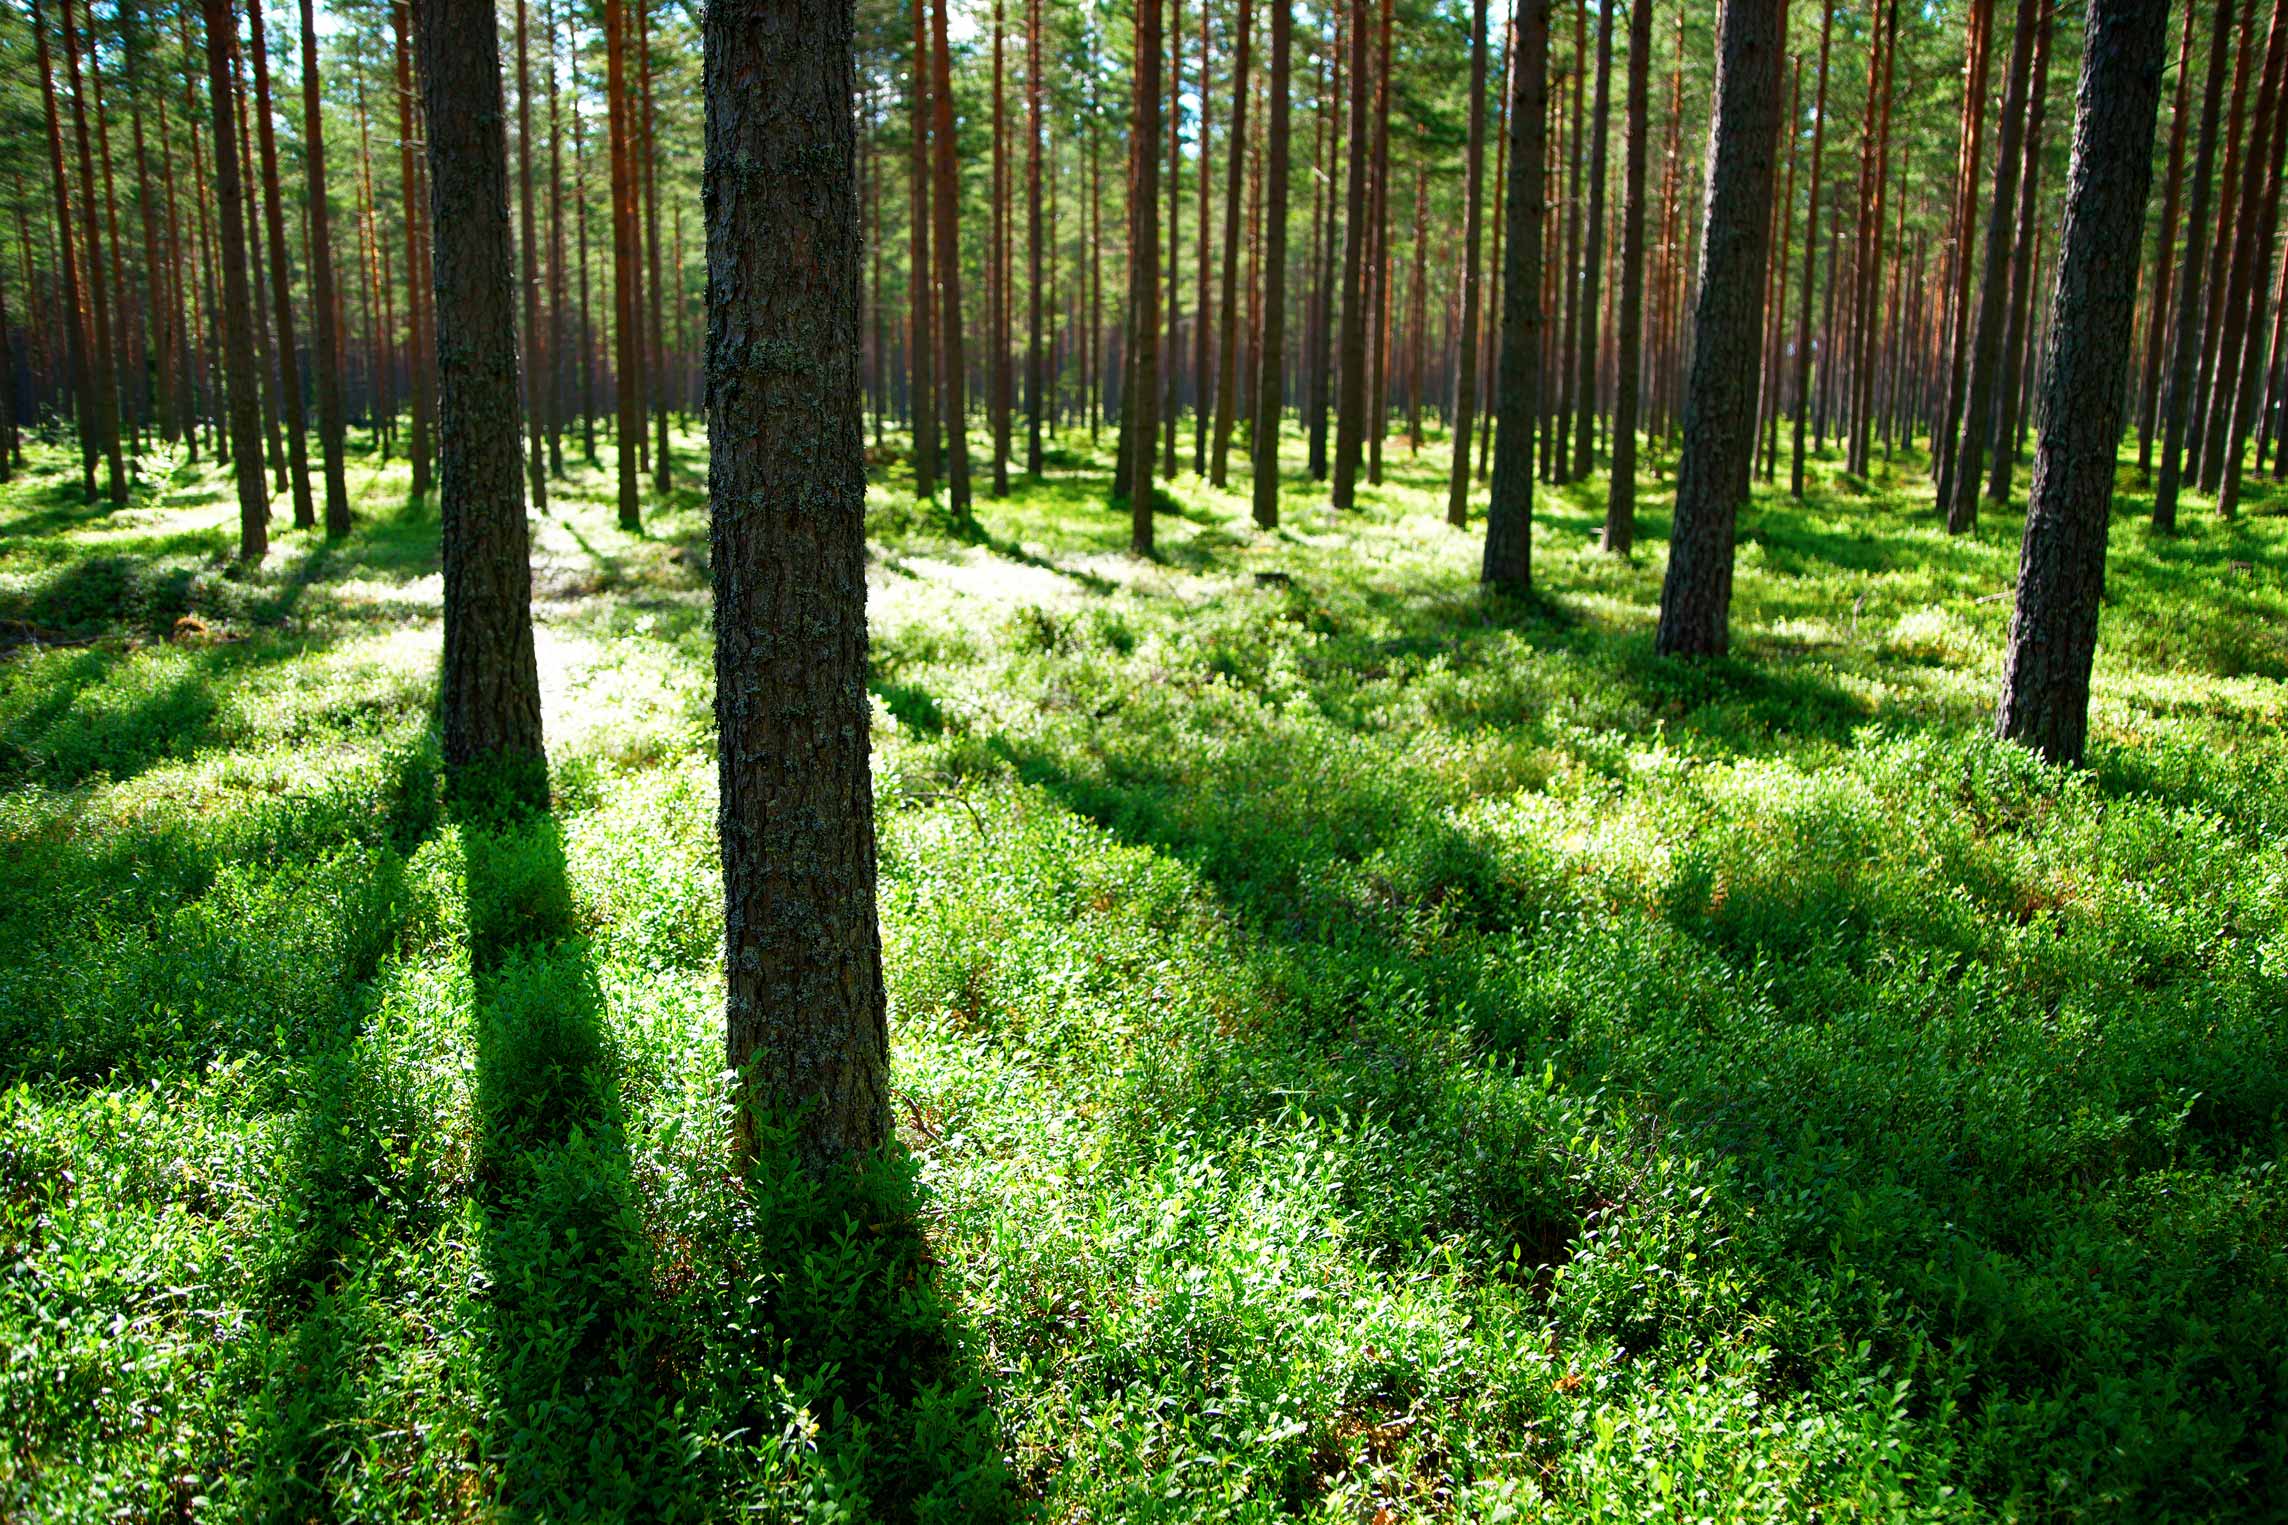 5 genius energy lessons we can learn from Sweden